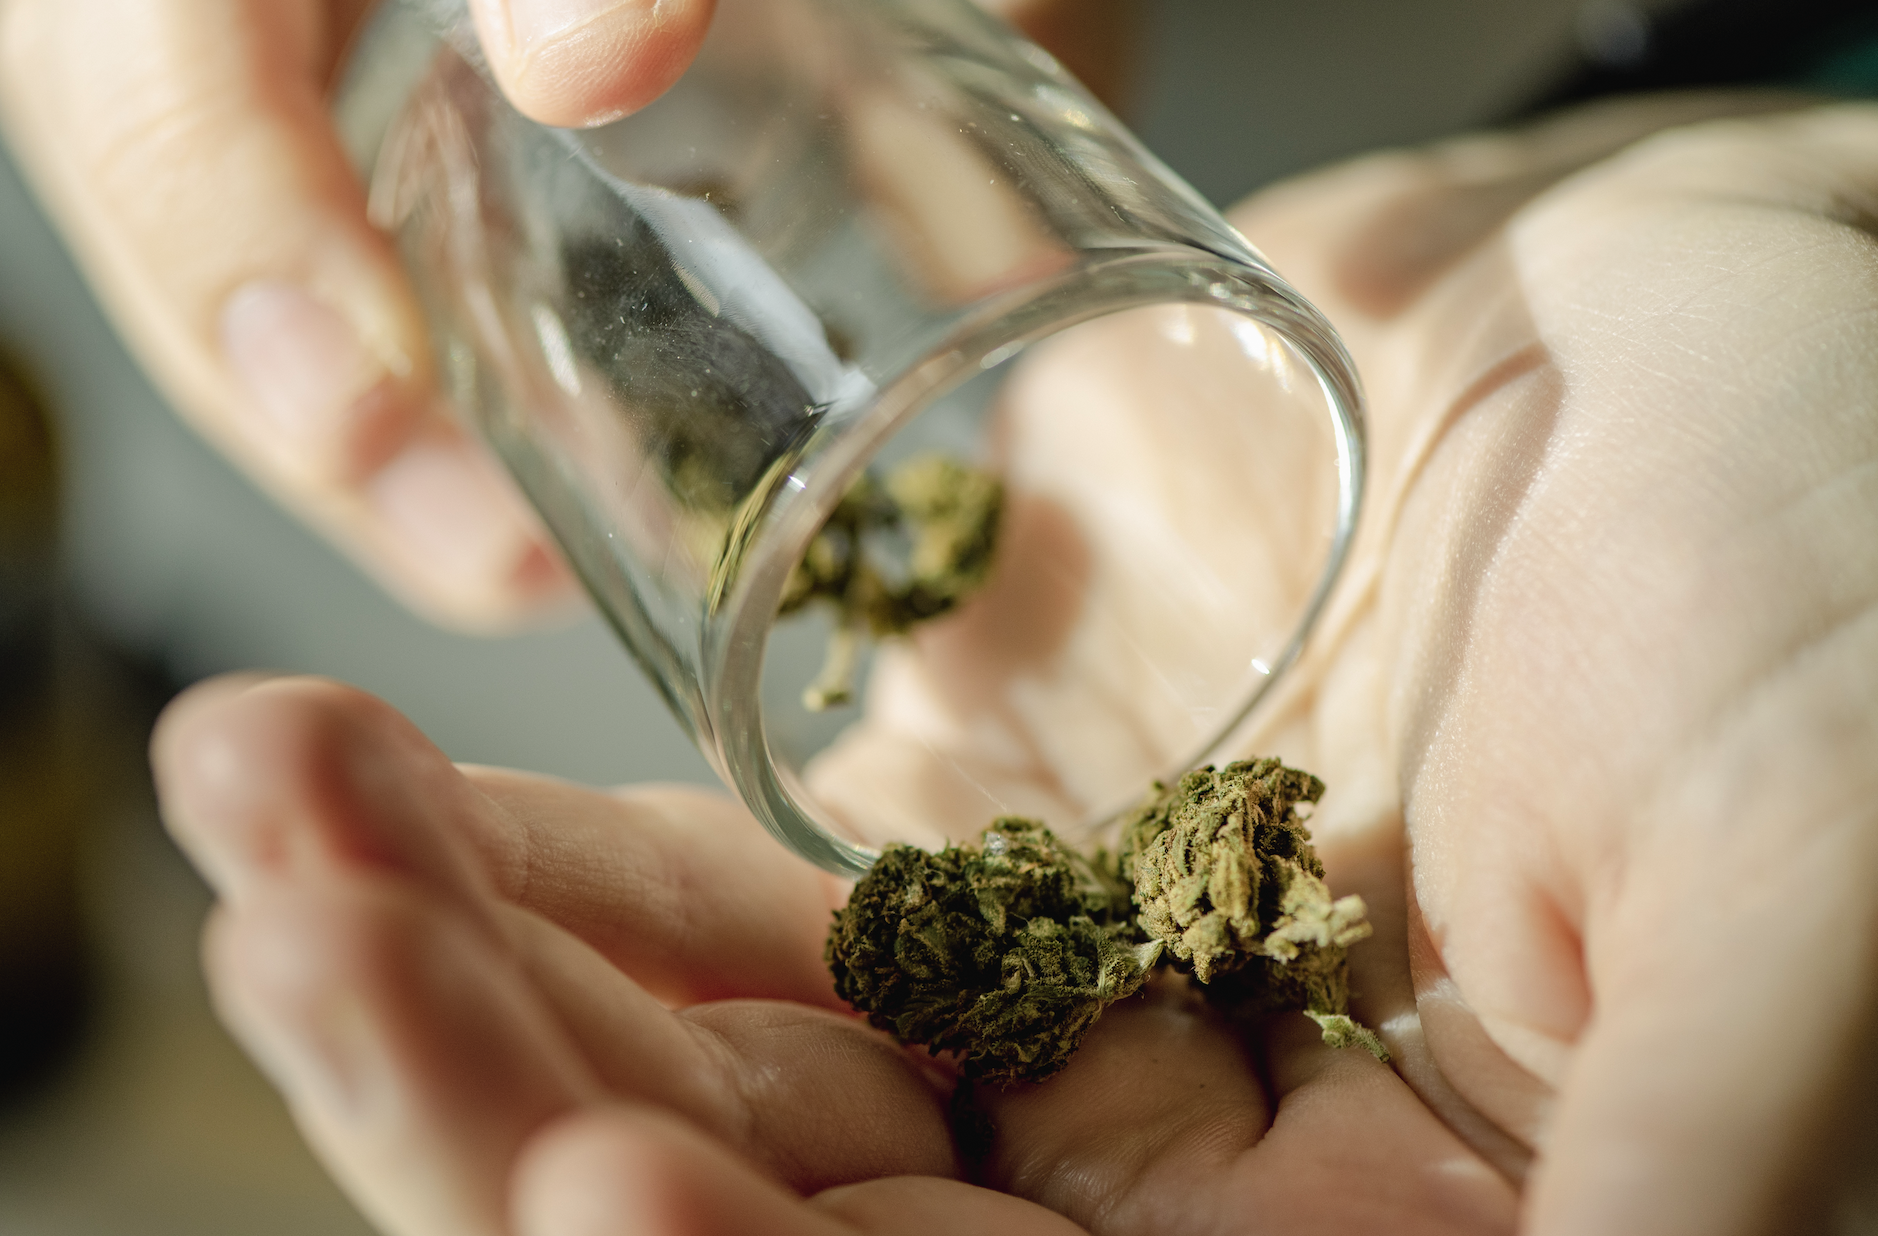 Person pouring dried cannabis buds from a glass jar into their hand